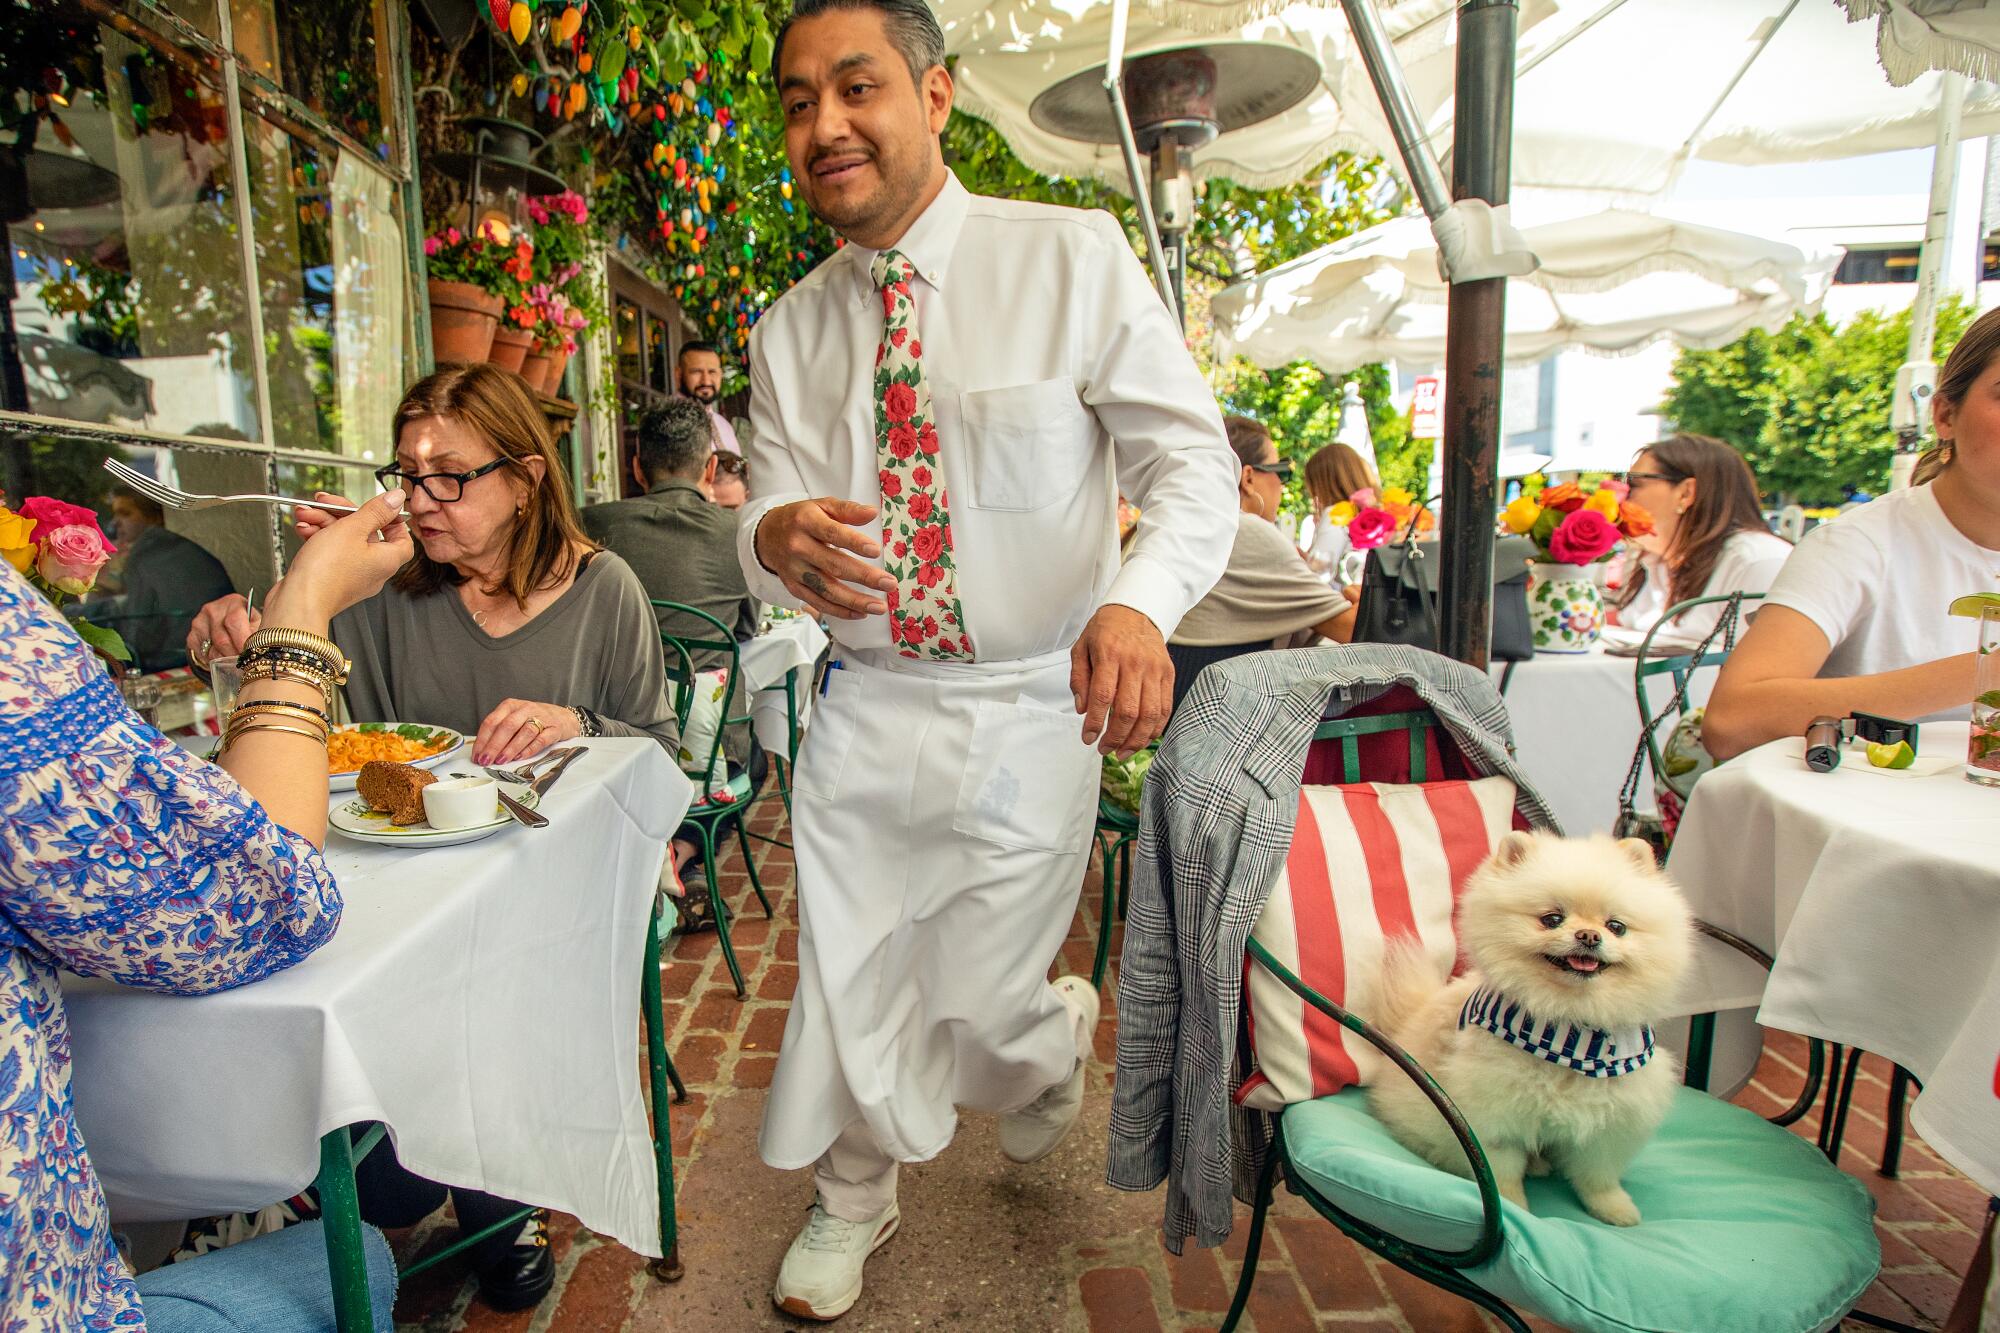 A waiter walking in between tables on a busy patio, with a Pomeranian sitting at the table on the right.